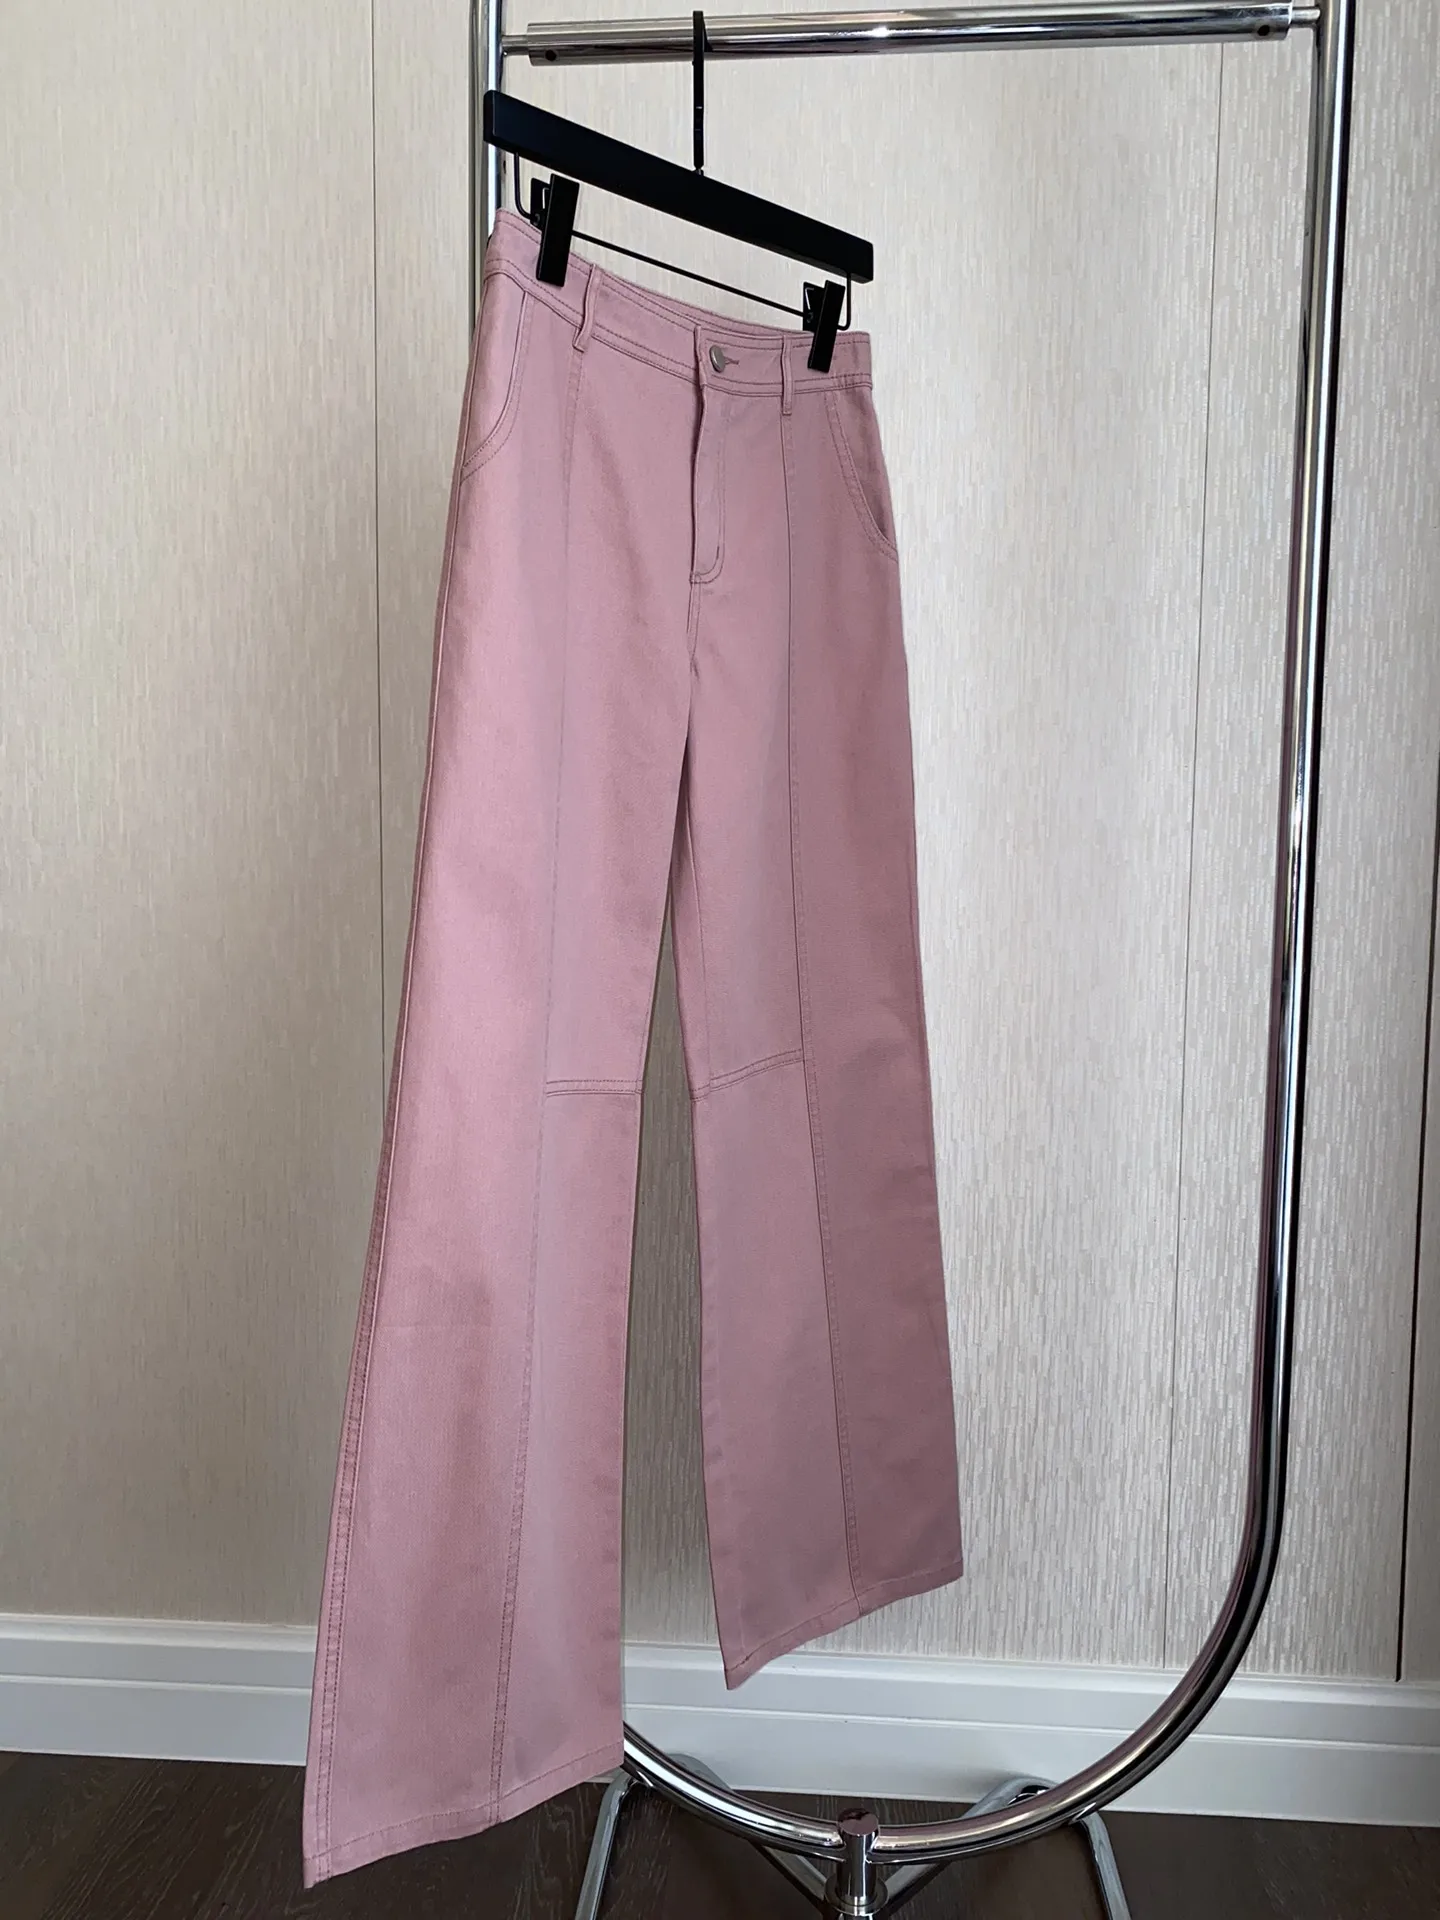 2023 spring and summer new casual pants version of the first class texture thin legs straight